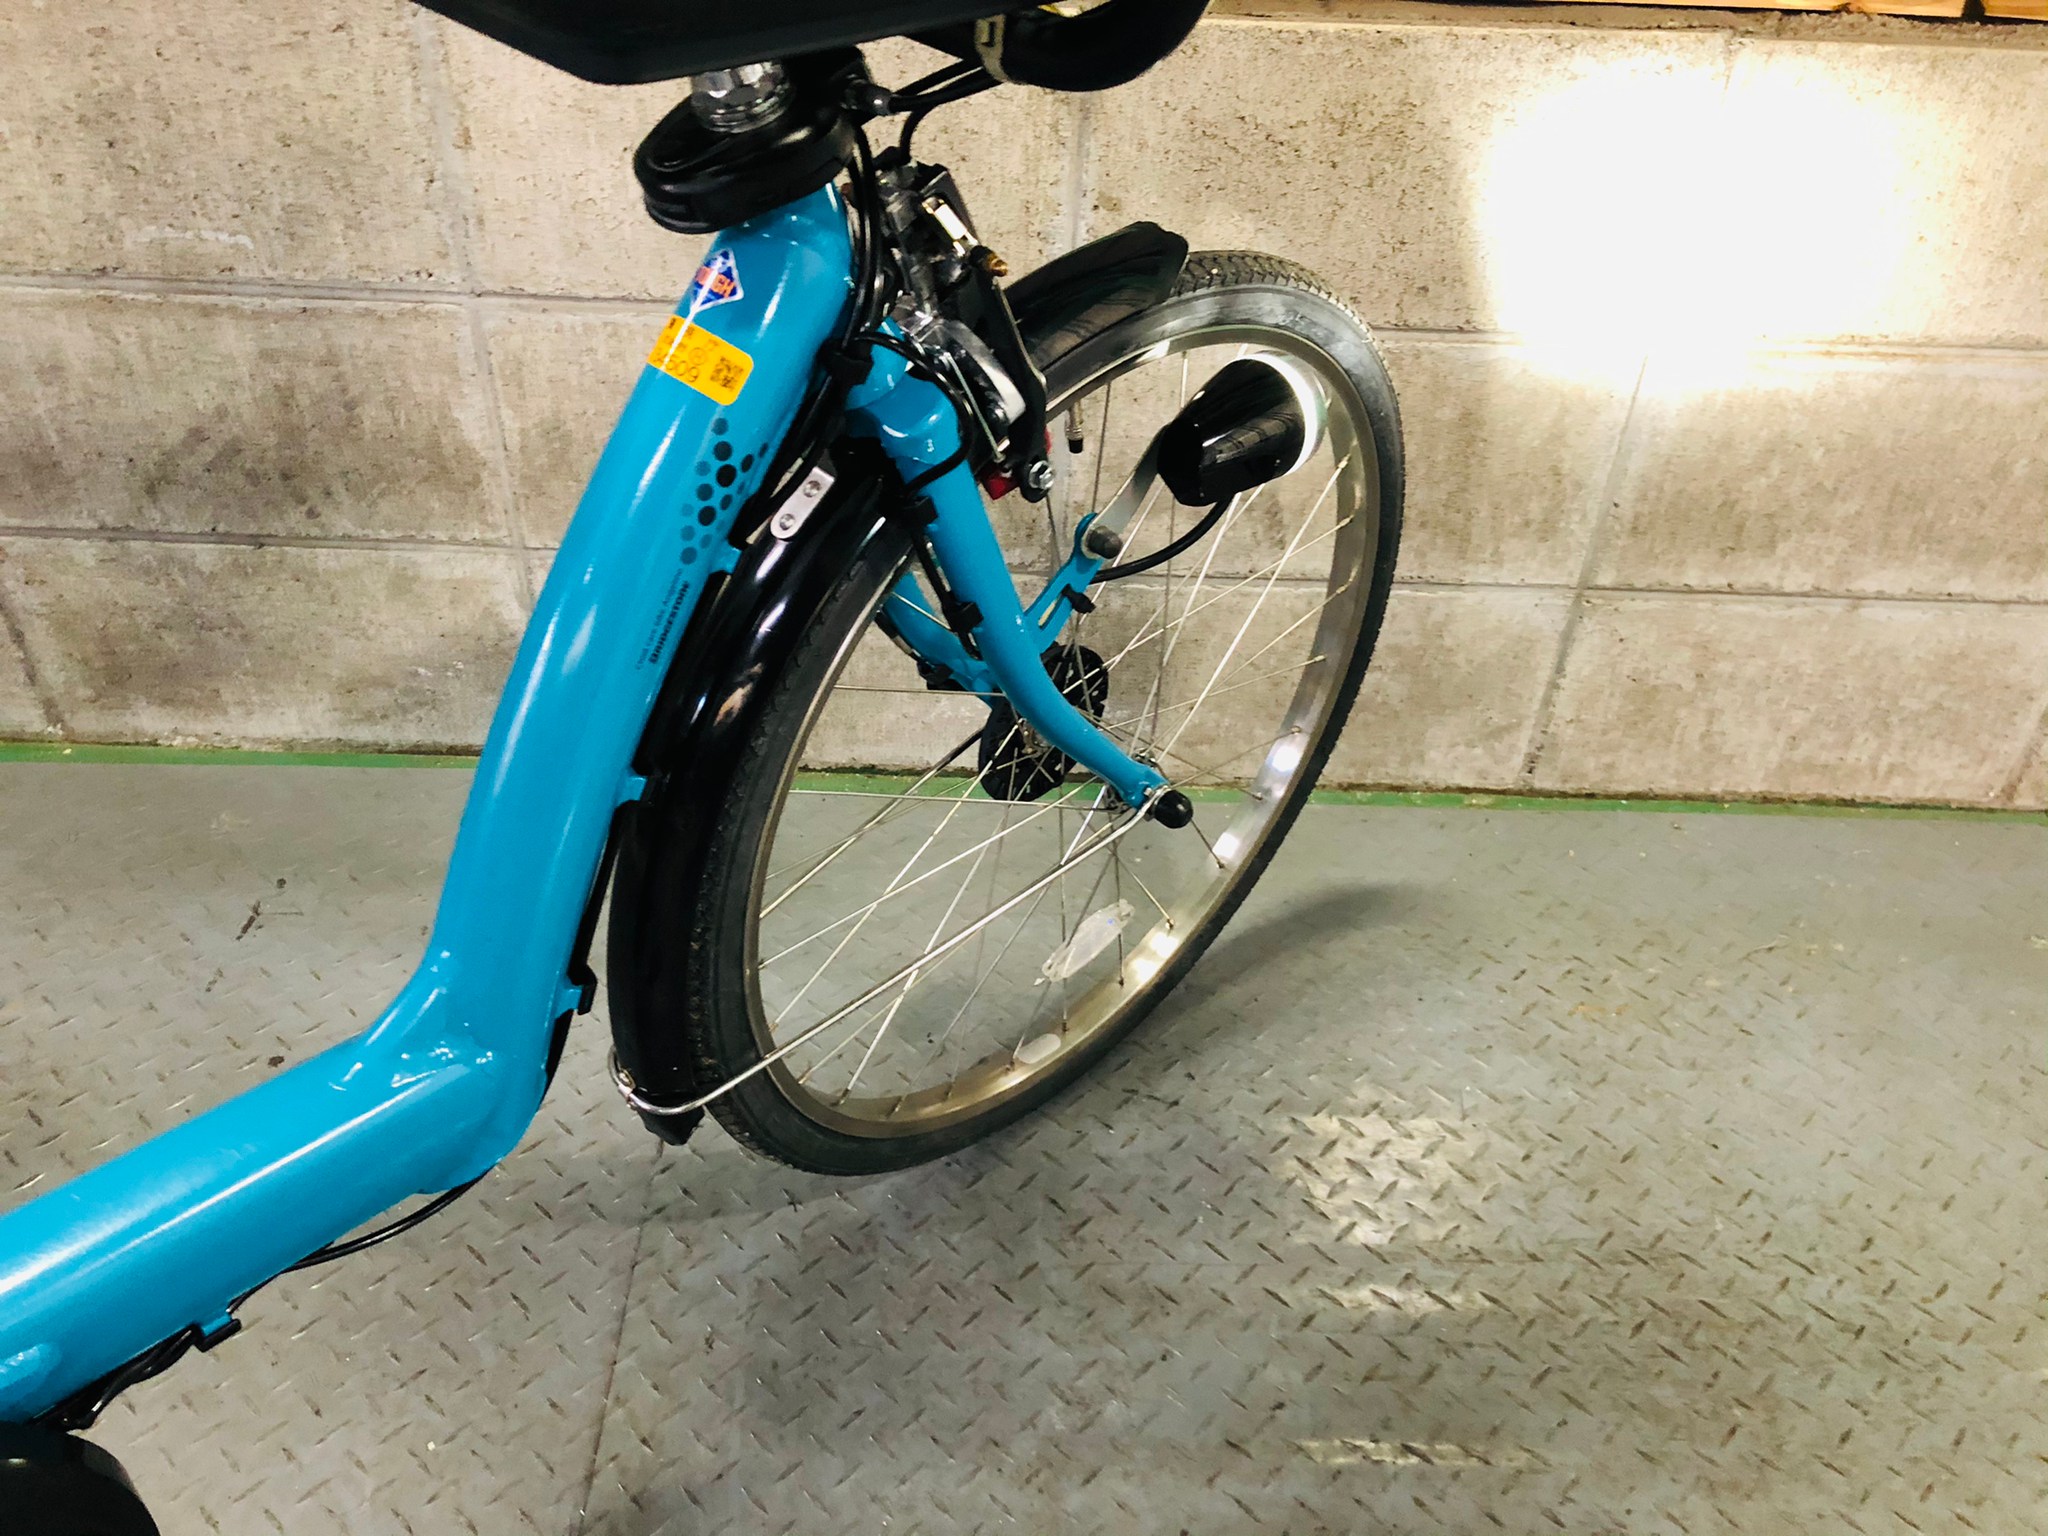 【SOLD OUT】電動自転車 ブリヂストン アンジェリーノ 22/26インチ 8.7Ah 水色 | 国産・中古の激安電動アシスト自転車を販売